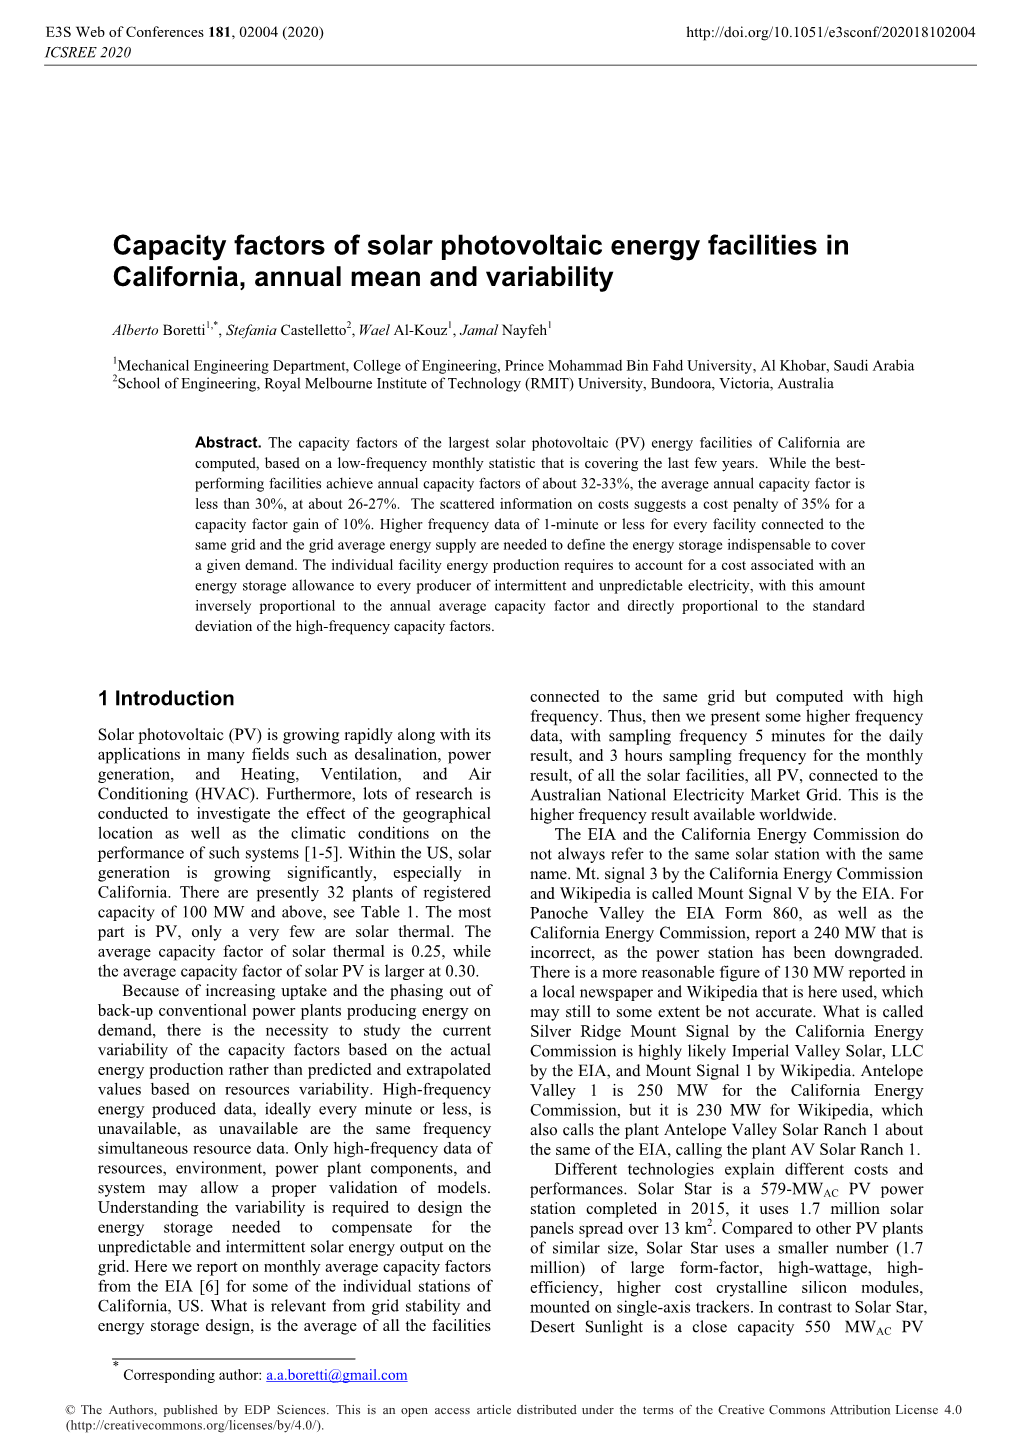 Capacity Factors of Solar Photovoltaic Energy Facilities in California, Annual Mean and Variability